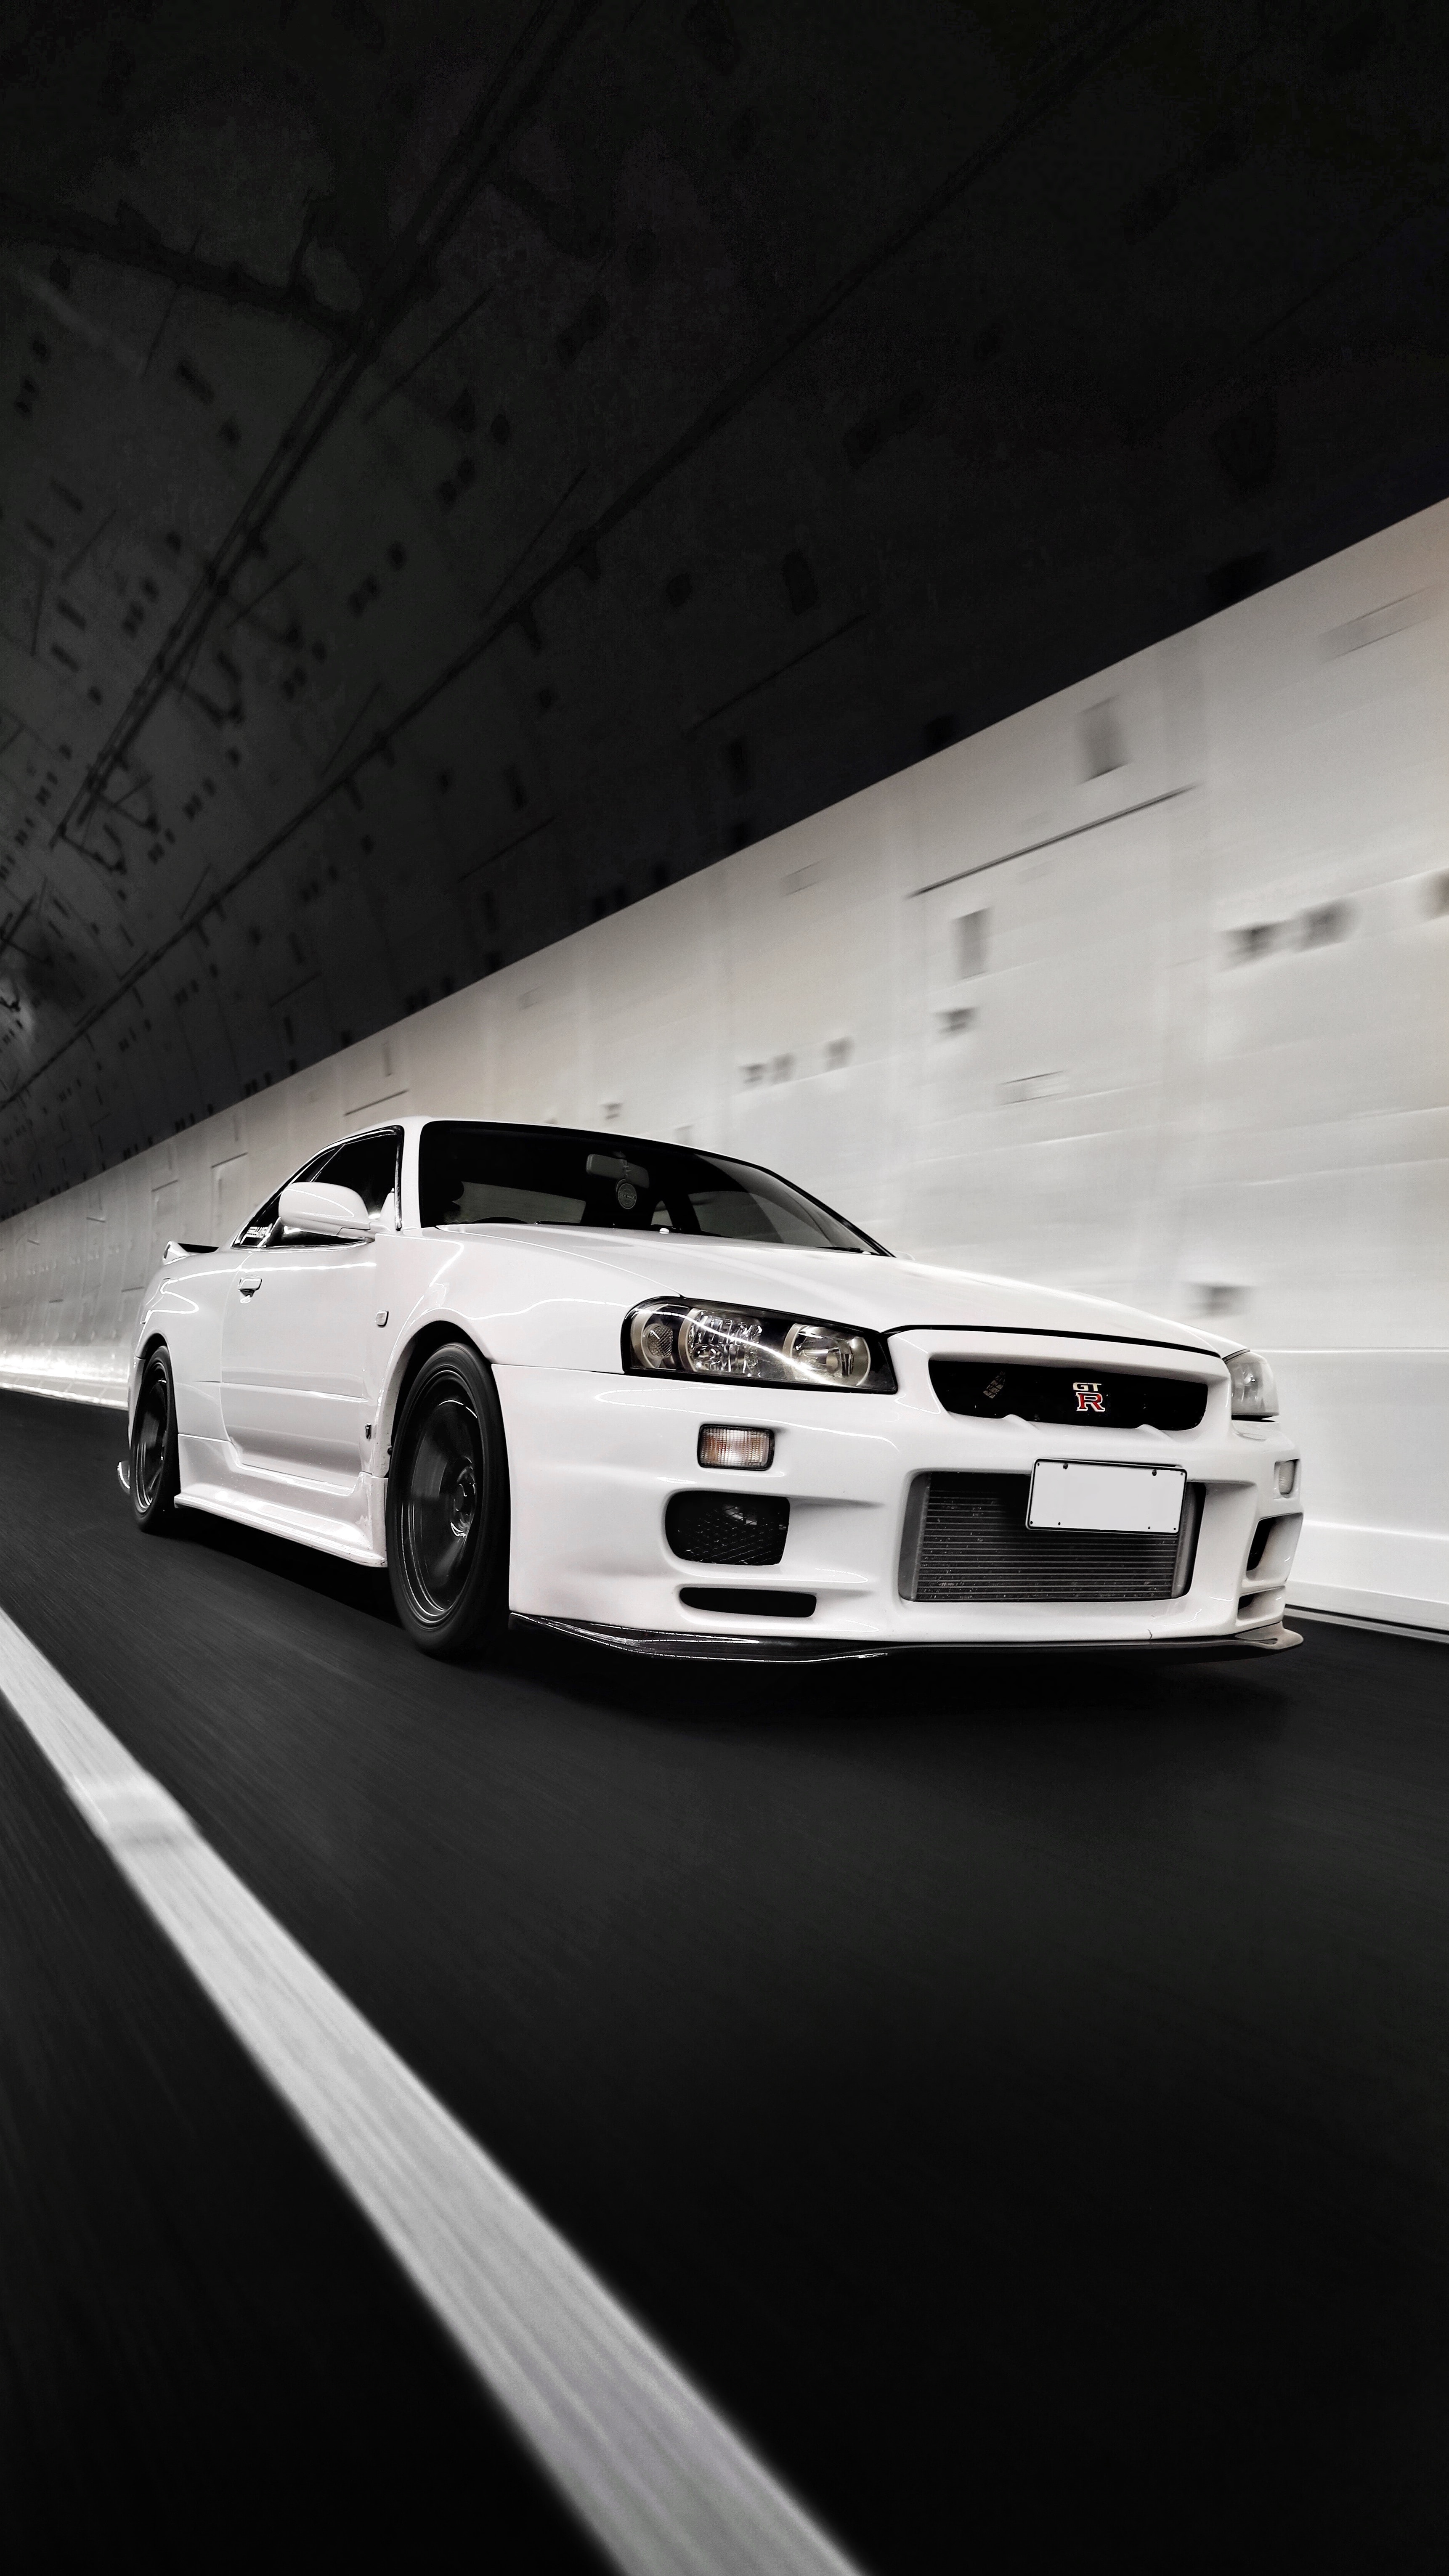 nissan, nissan gt r, cars, white, traffic, movement, side view